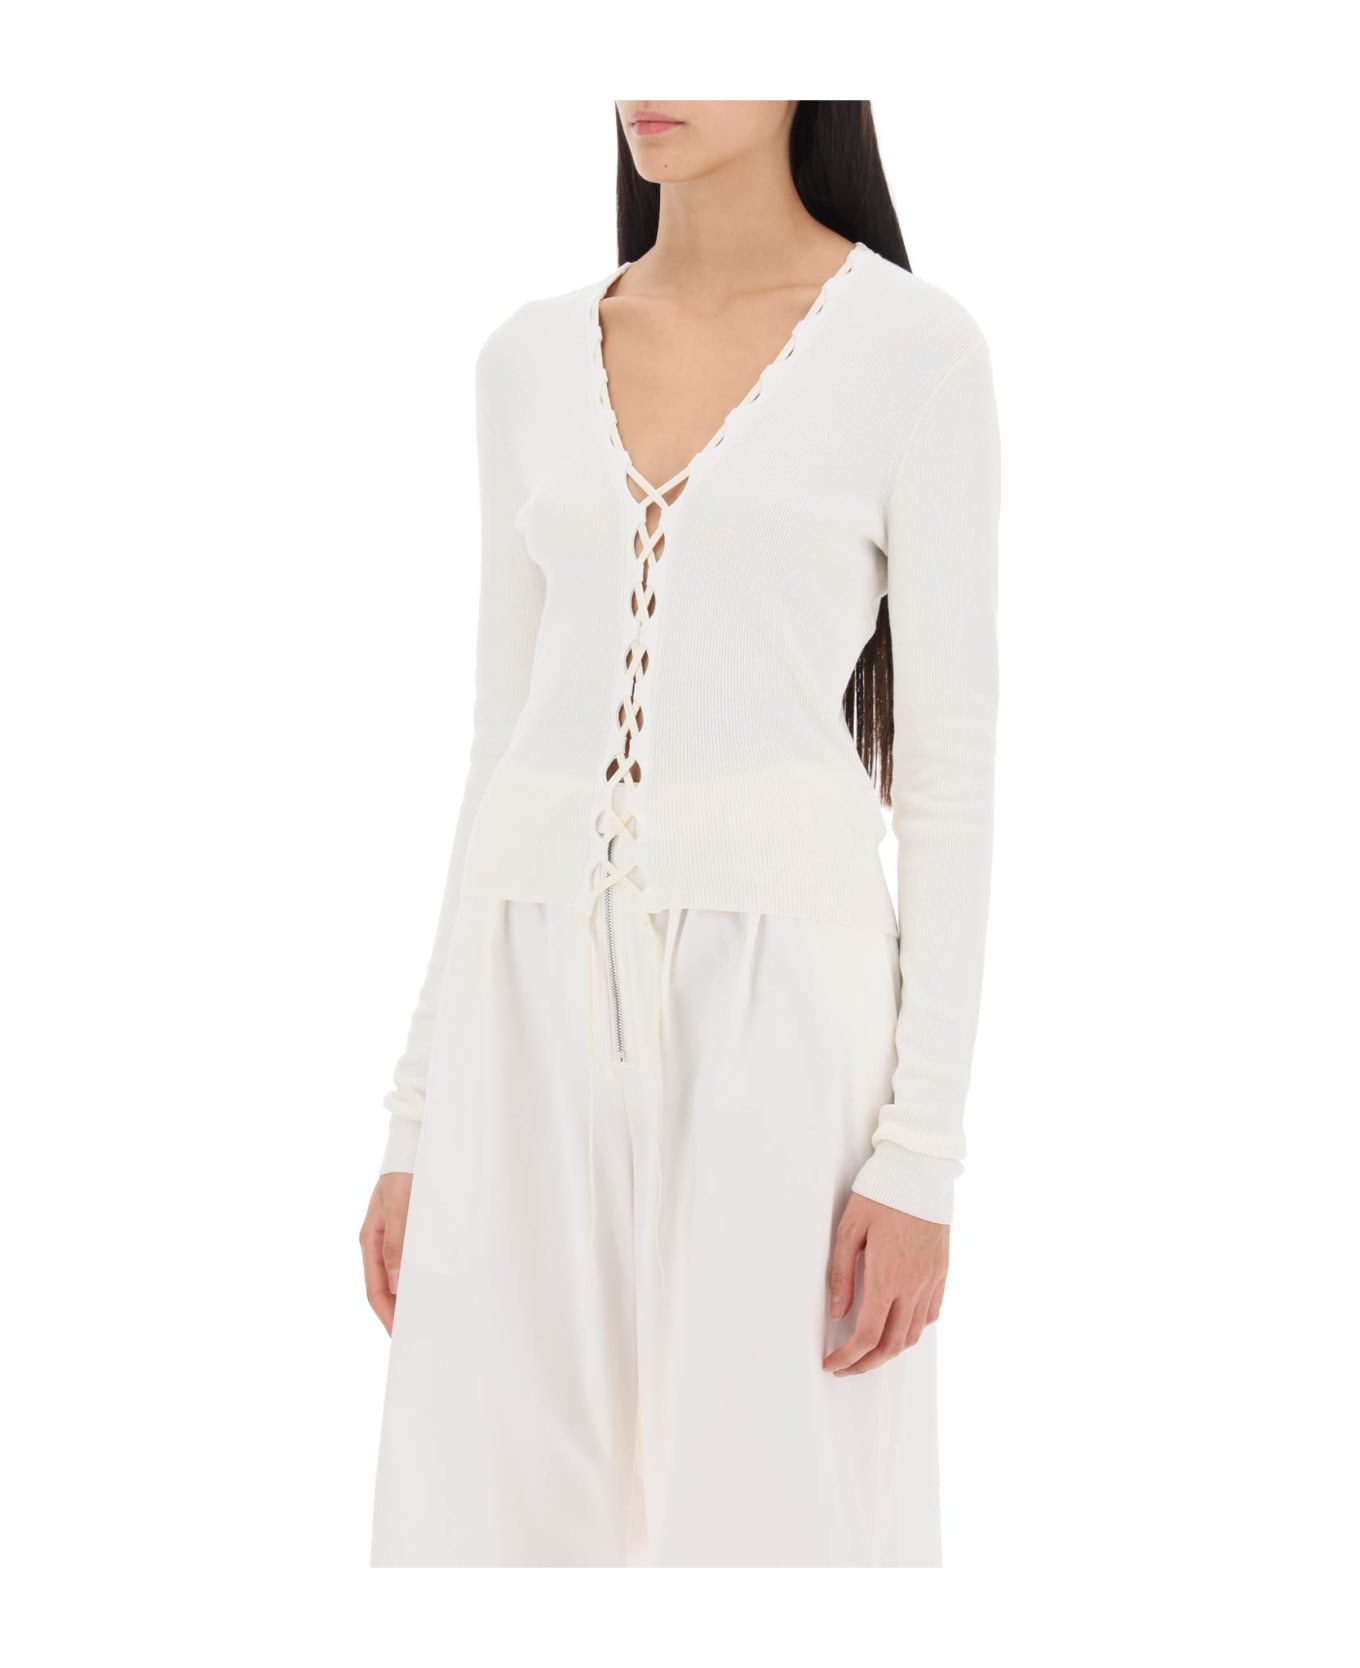 Dion Lee Lace-up Cardigan - WHITE CREAM (White) カーディガン